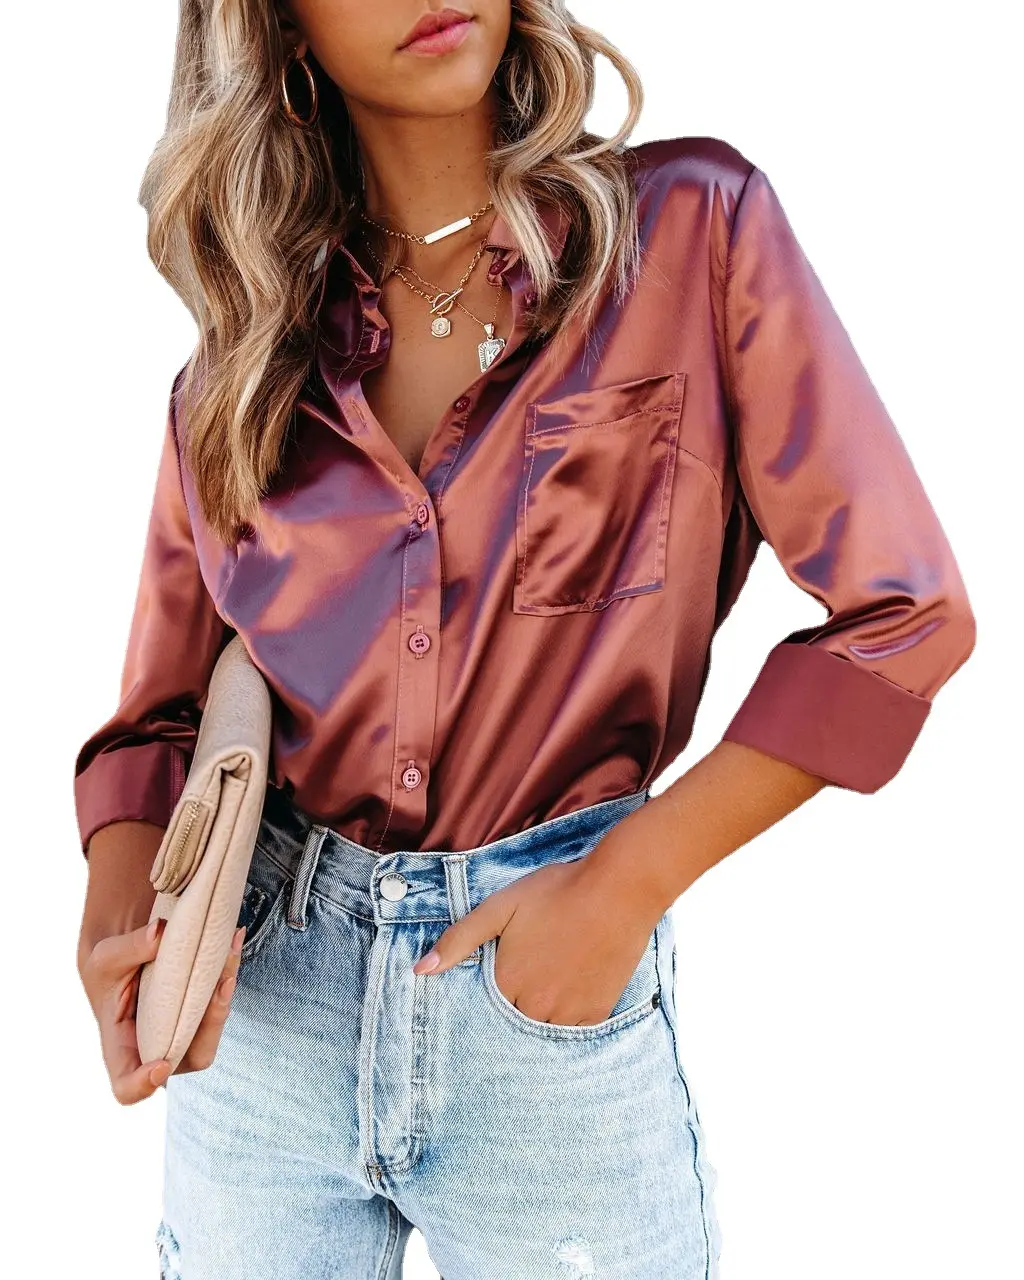 lady plus size women's blouses & shirts new arrival solid casual women shirt top hot sale long sleeve satin shirt